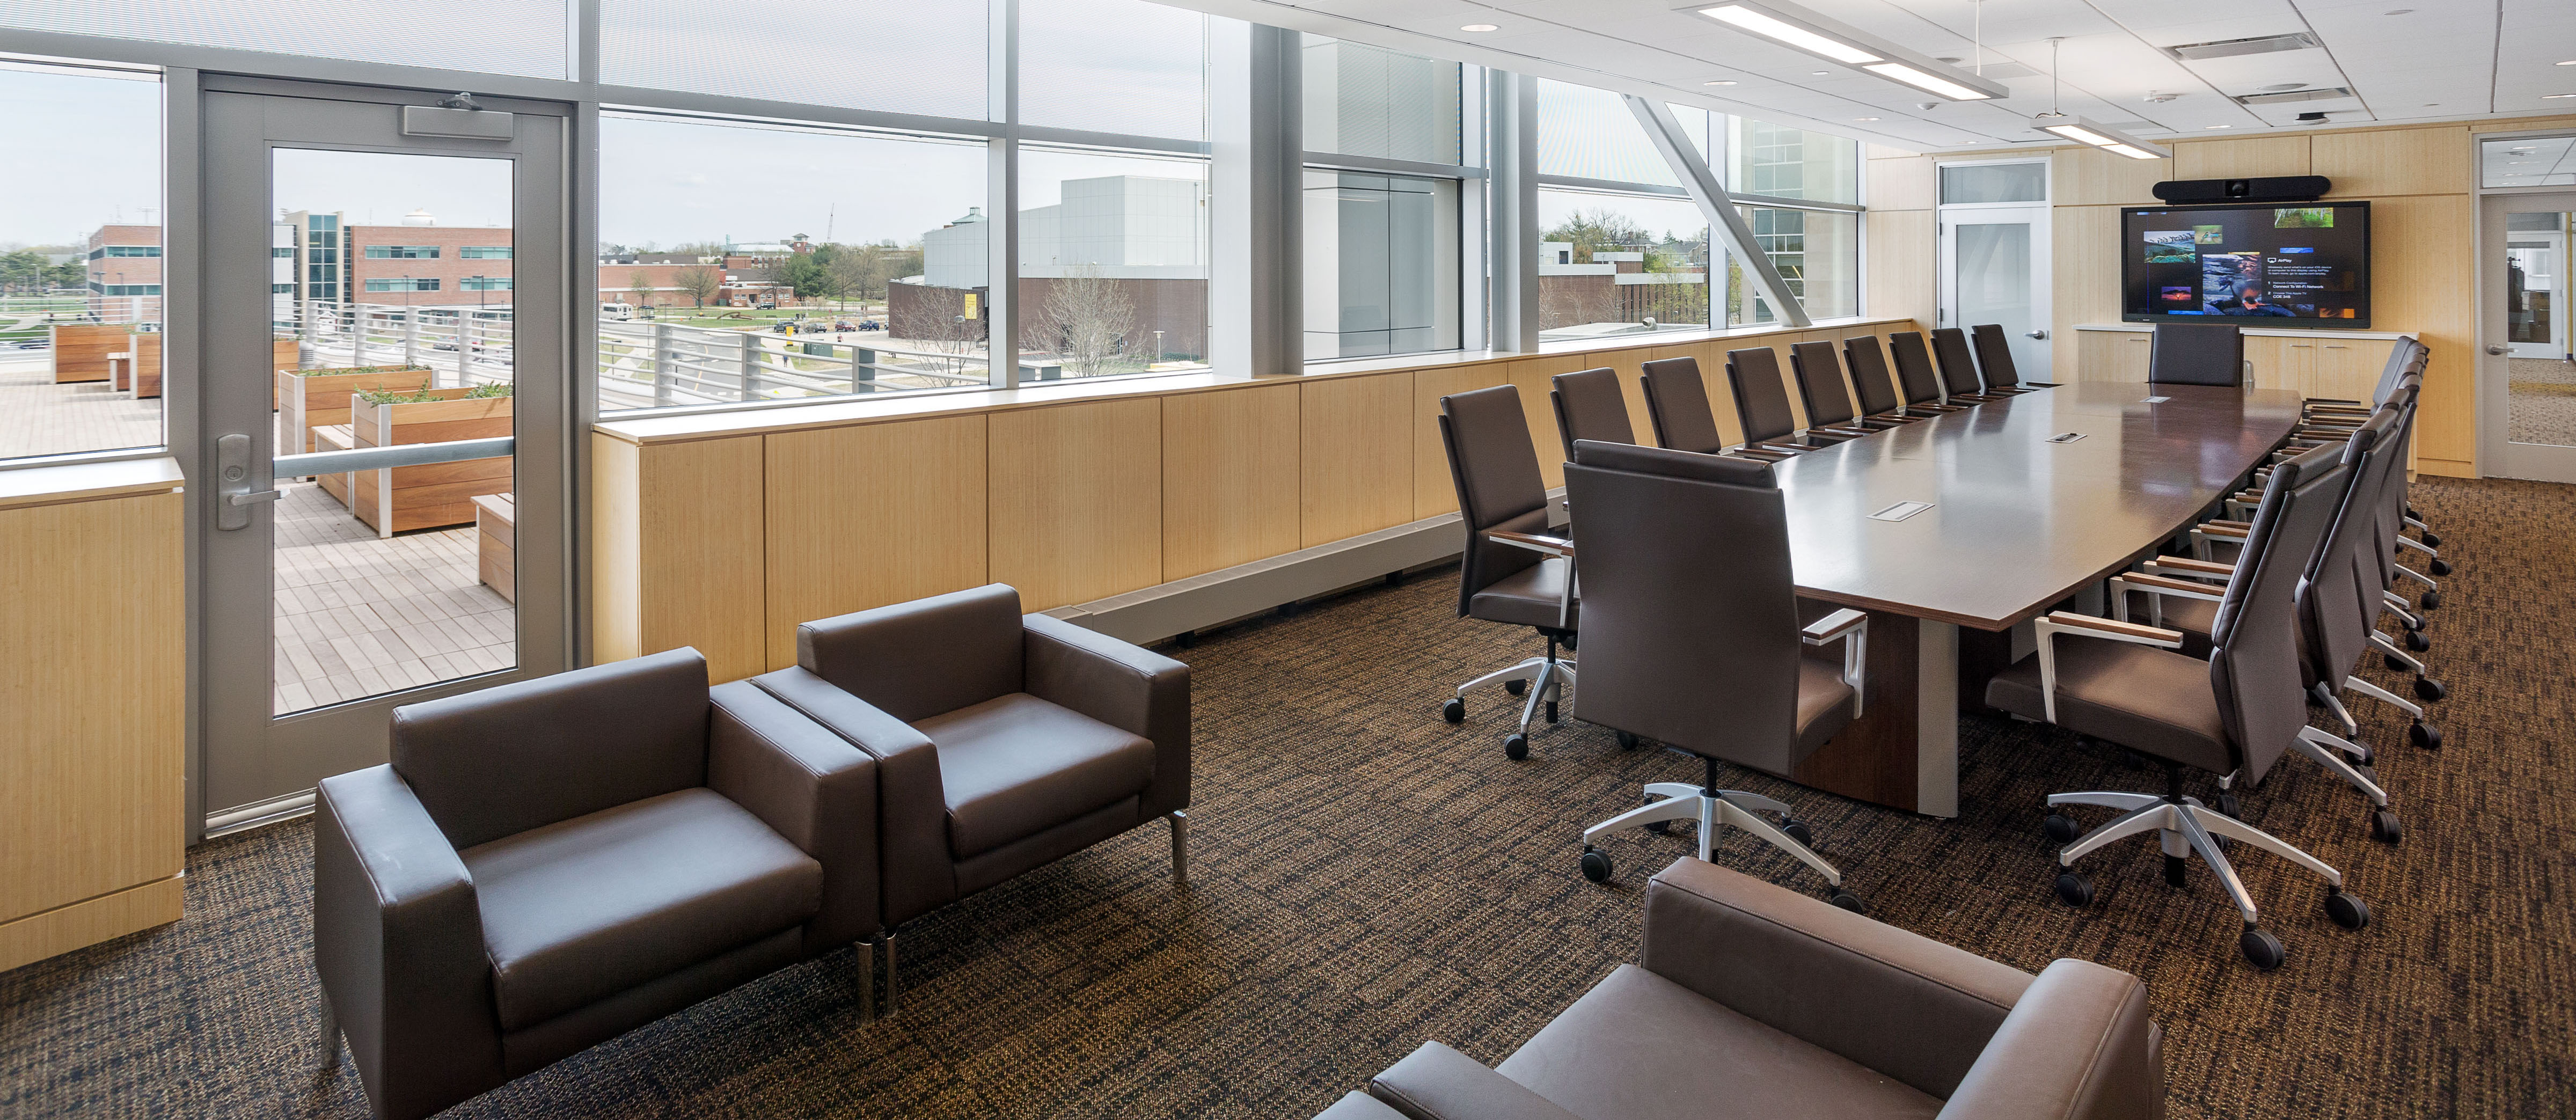 image of a conference room in Engineering Hall